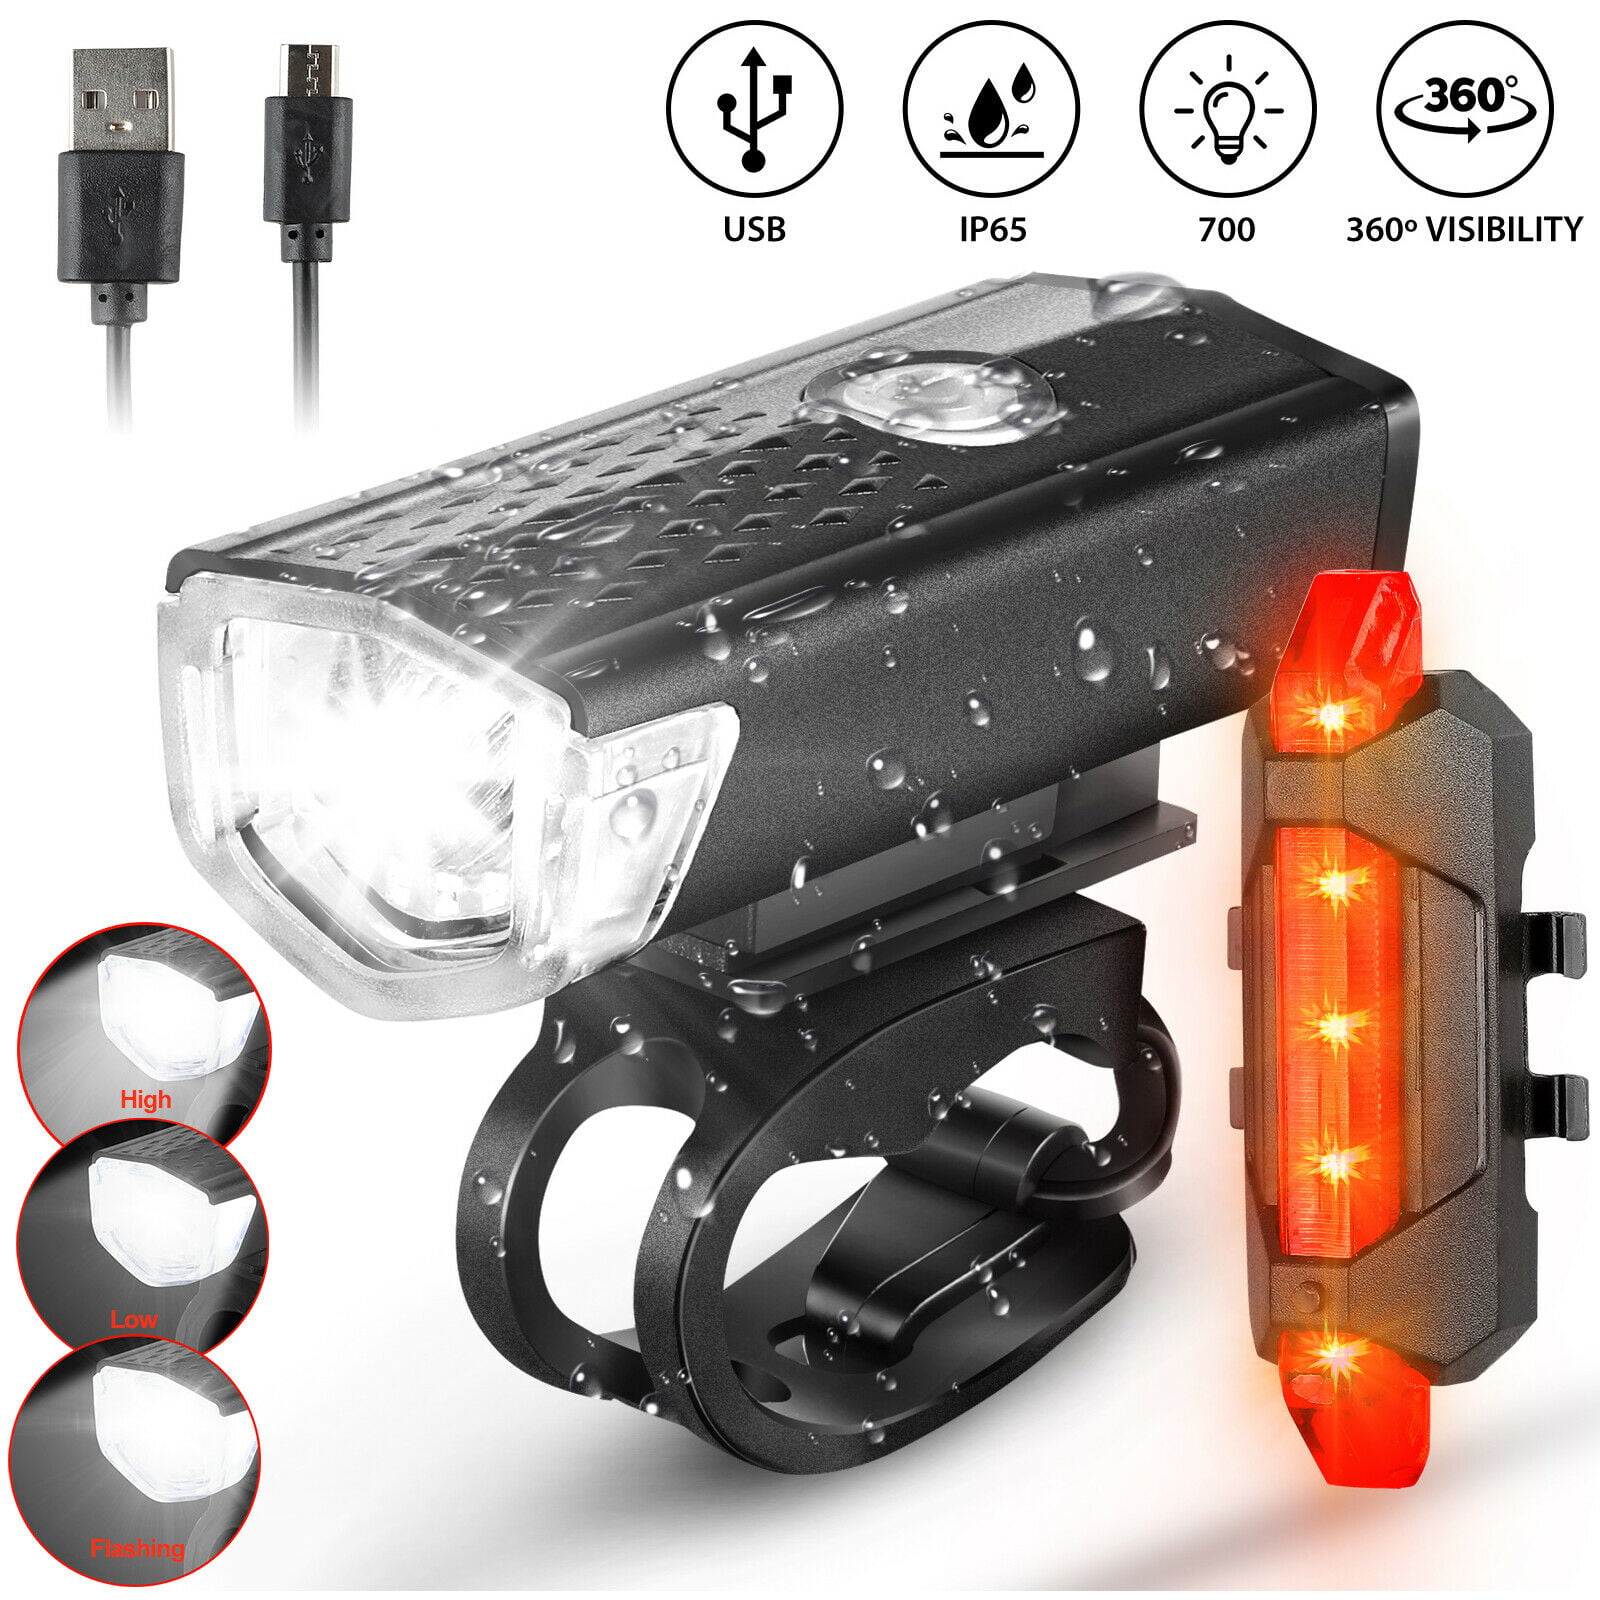 USB Rechargeable LED Bicycle Bike Front Rear Light Set Headlight Taillight Lamps